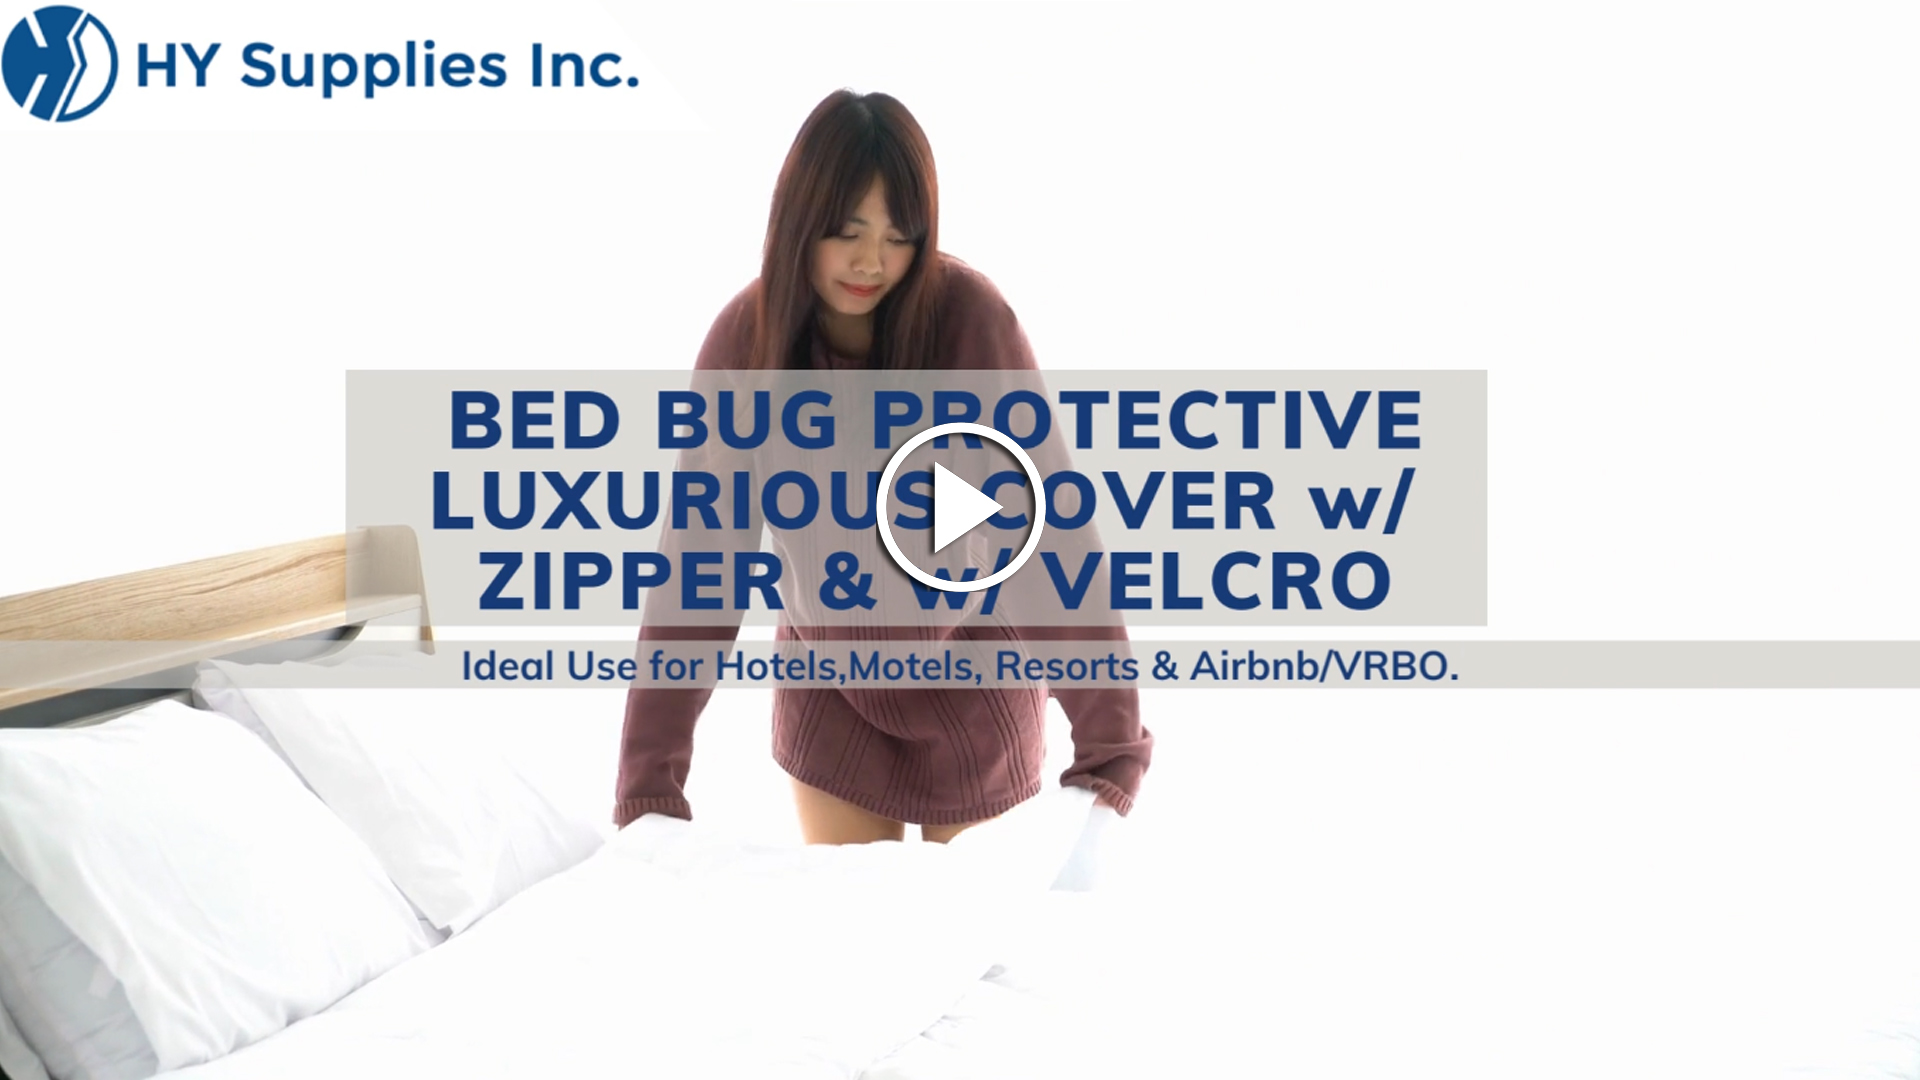 BED BUG PROTECTIVE LUXURIOUS COVER w/ ZIPPER & w/ VELCRO